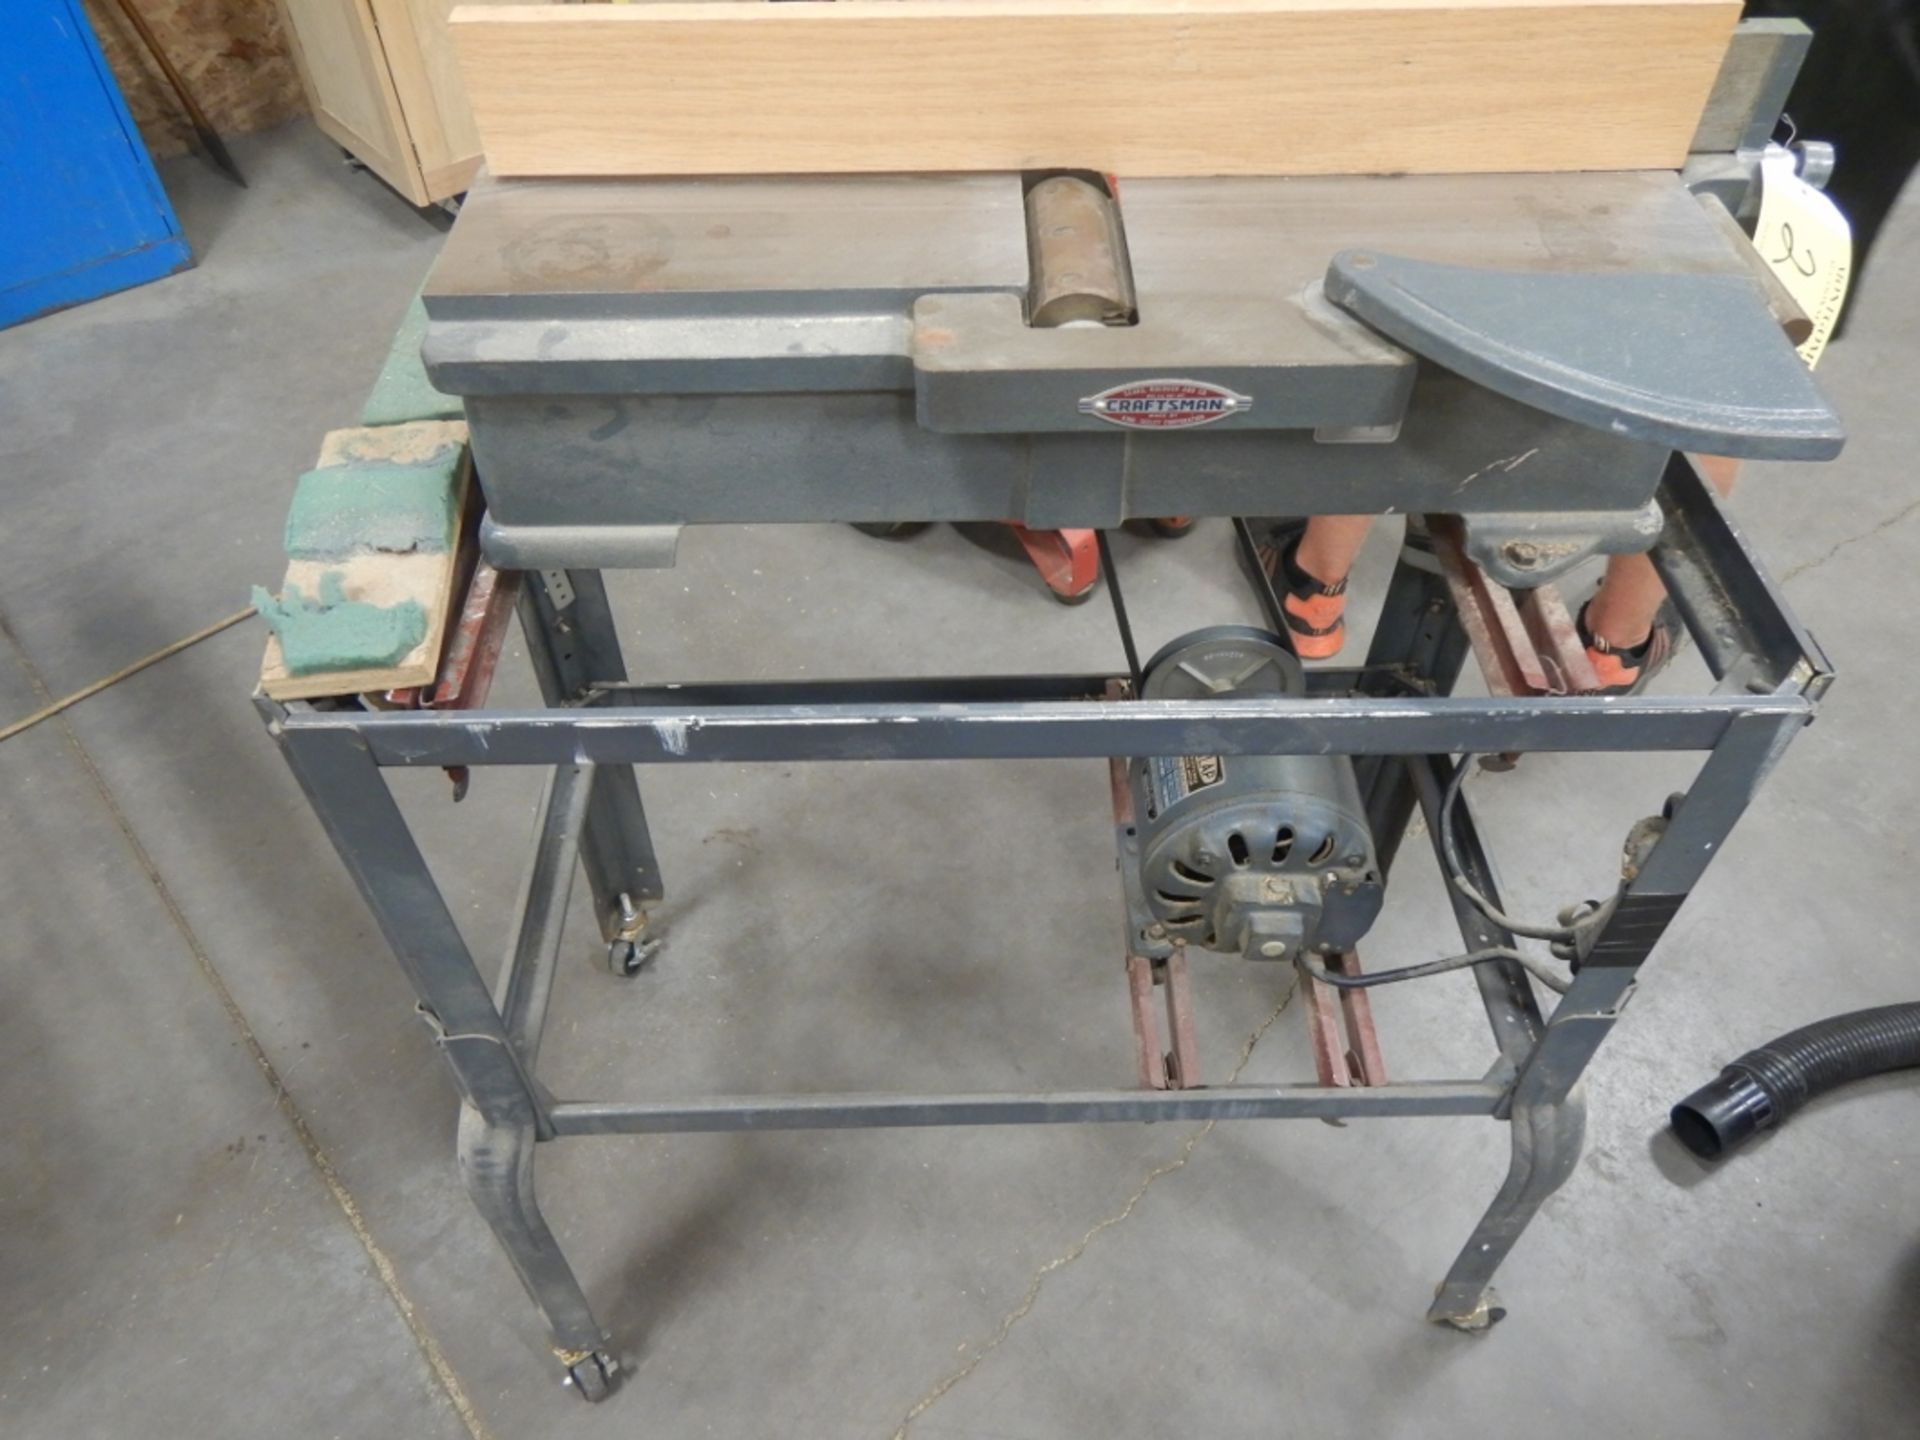 SEARS CRAFTSMAN 4IN JOINTER PLANER ON STAND - Image 10 of 10